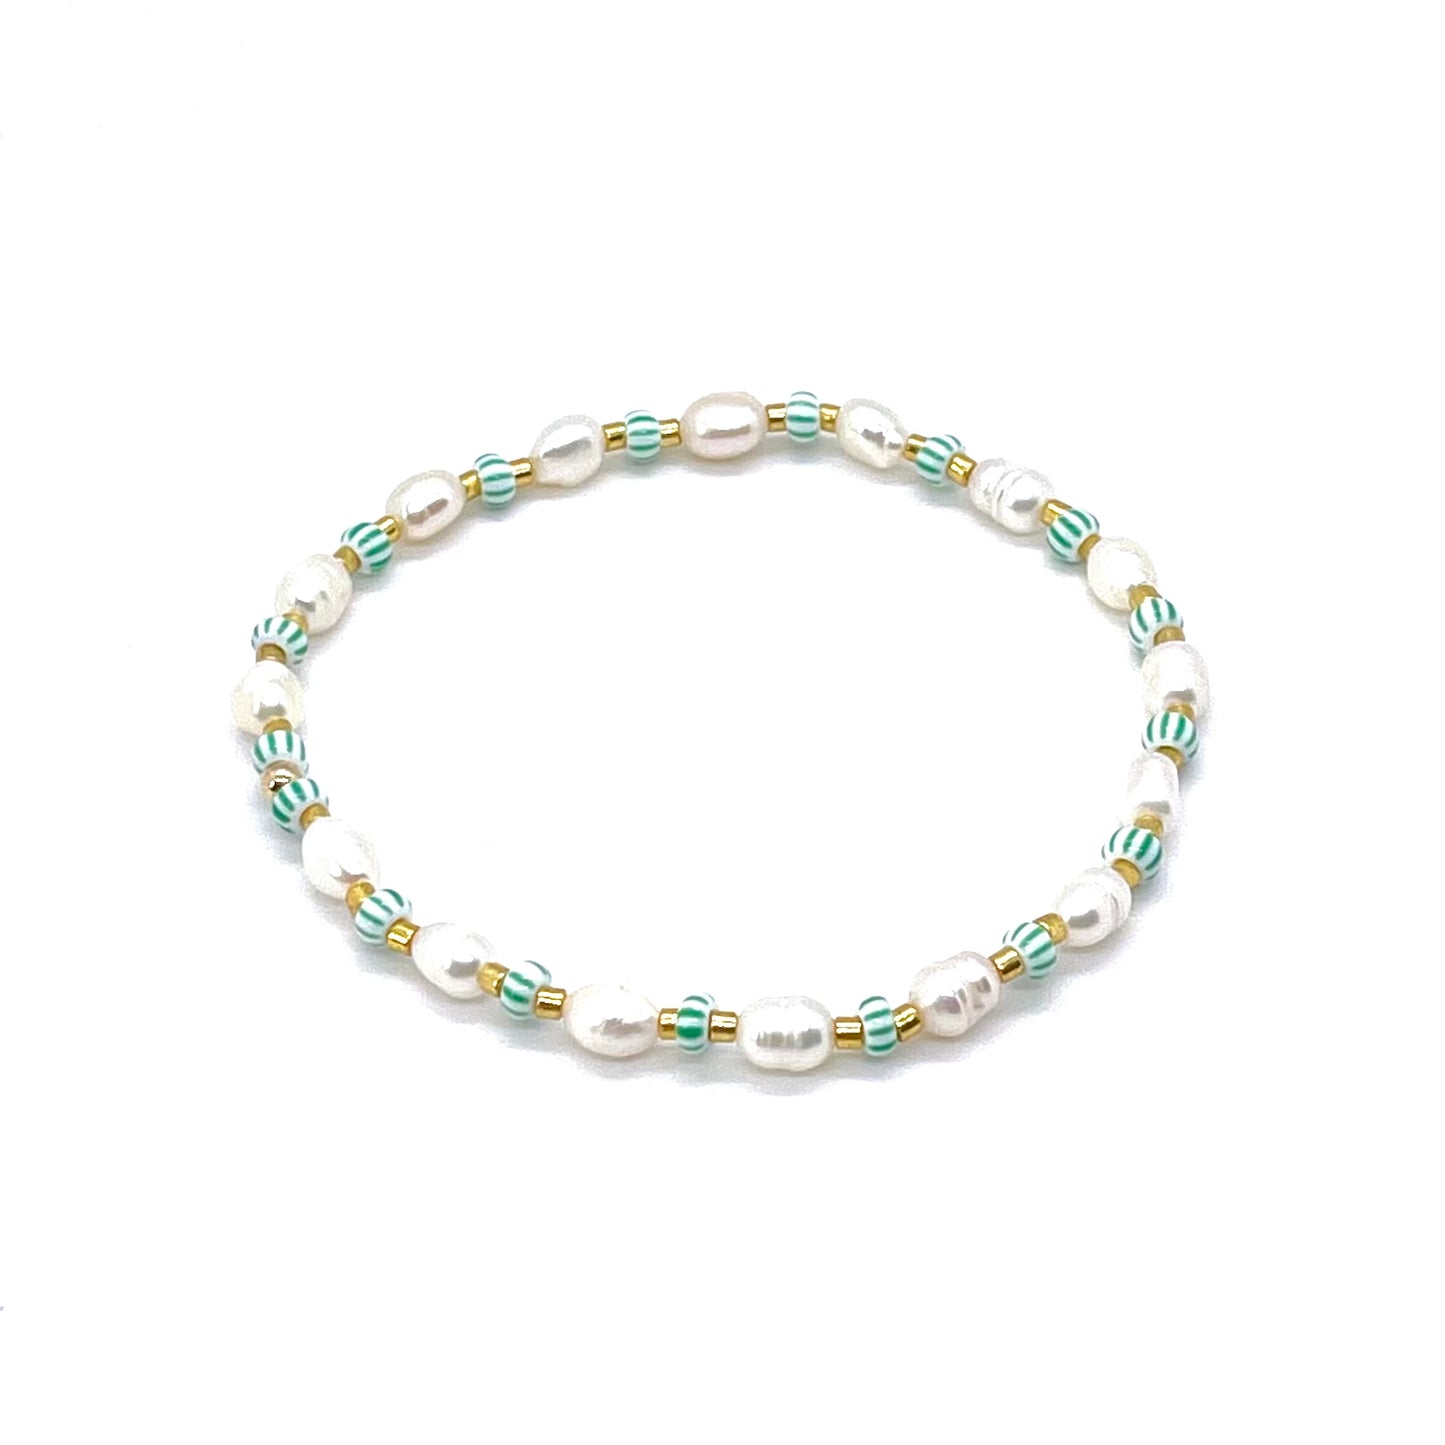 Pearl ankle bracelet with gold-tone and green & white striped seed beads on elastic stretch cord.